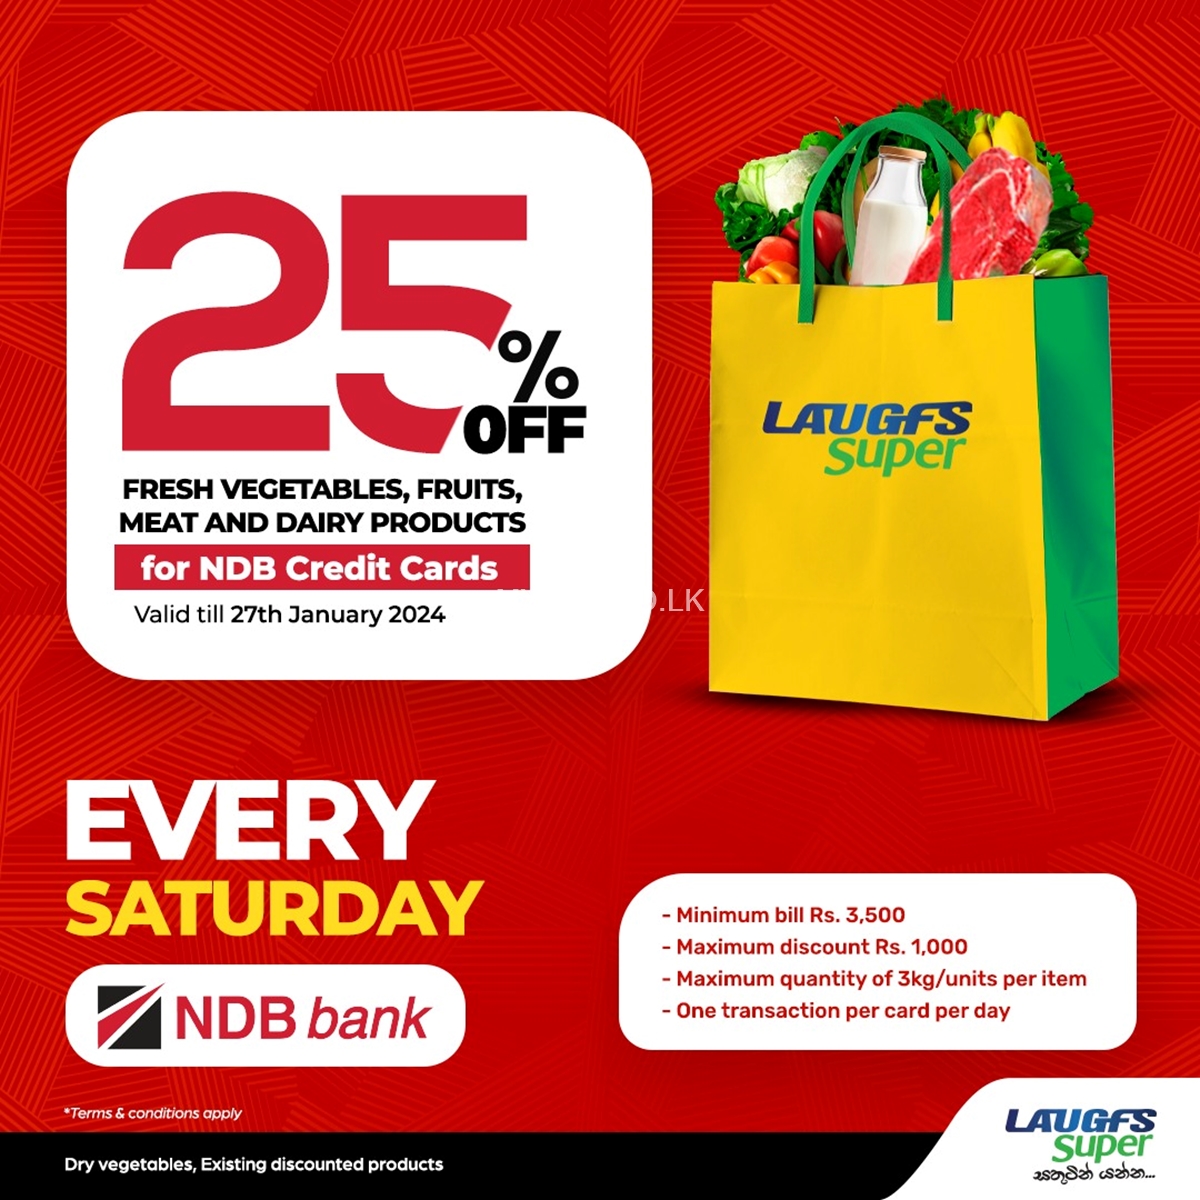 25% Off on Fresh Vegetables, Fruits, Meat and Dairy Products at LAUGFS Supermarket for NDB Credit Cards 